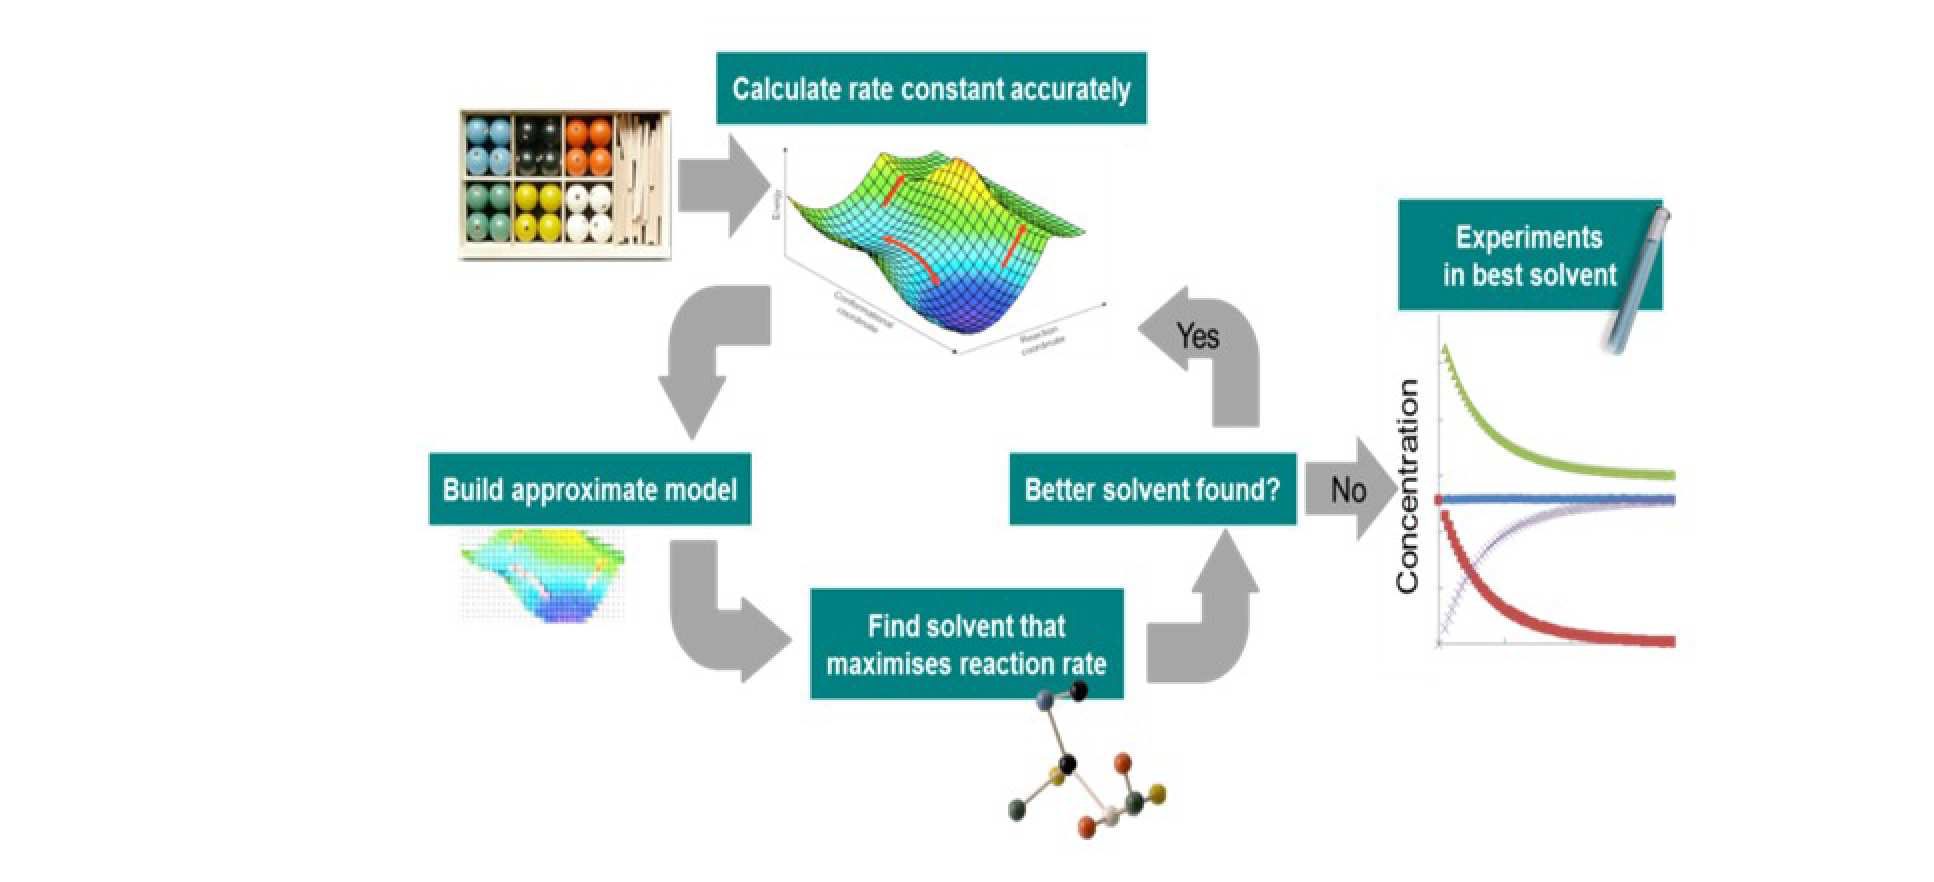 Figure 2. The QM-CAMD approach to solvent design for accelerating reactions